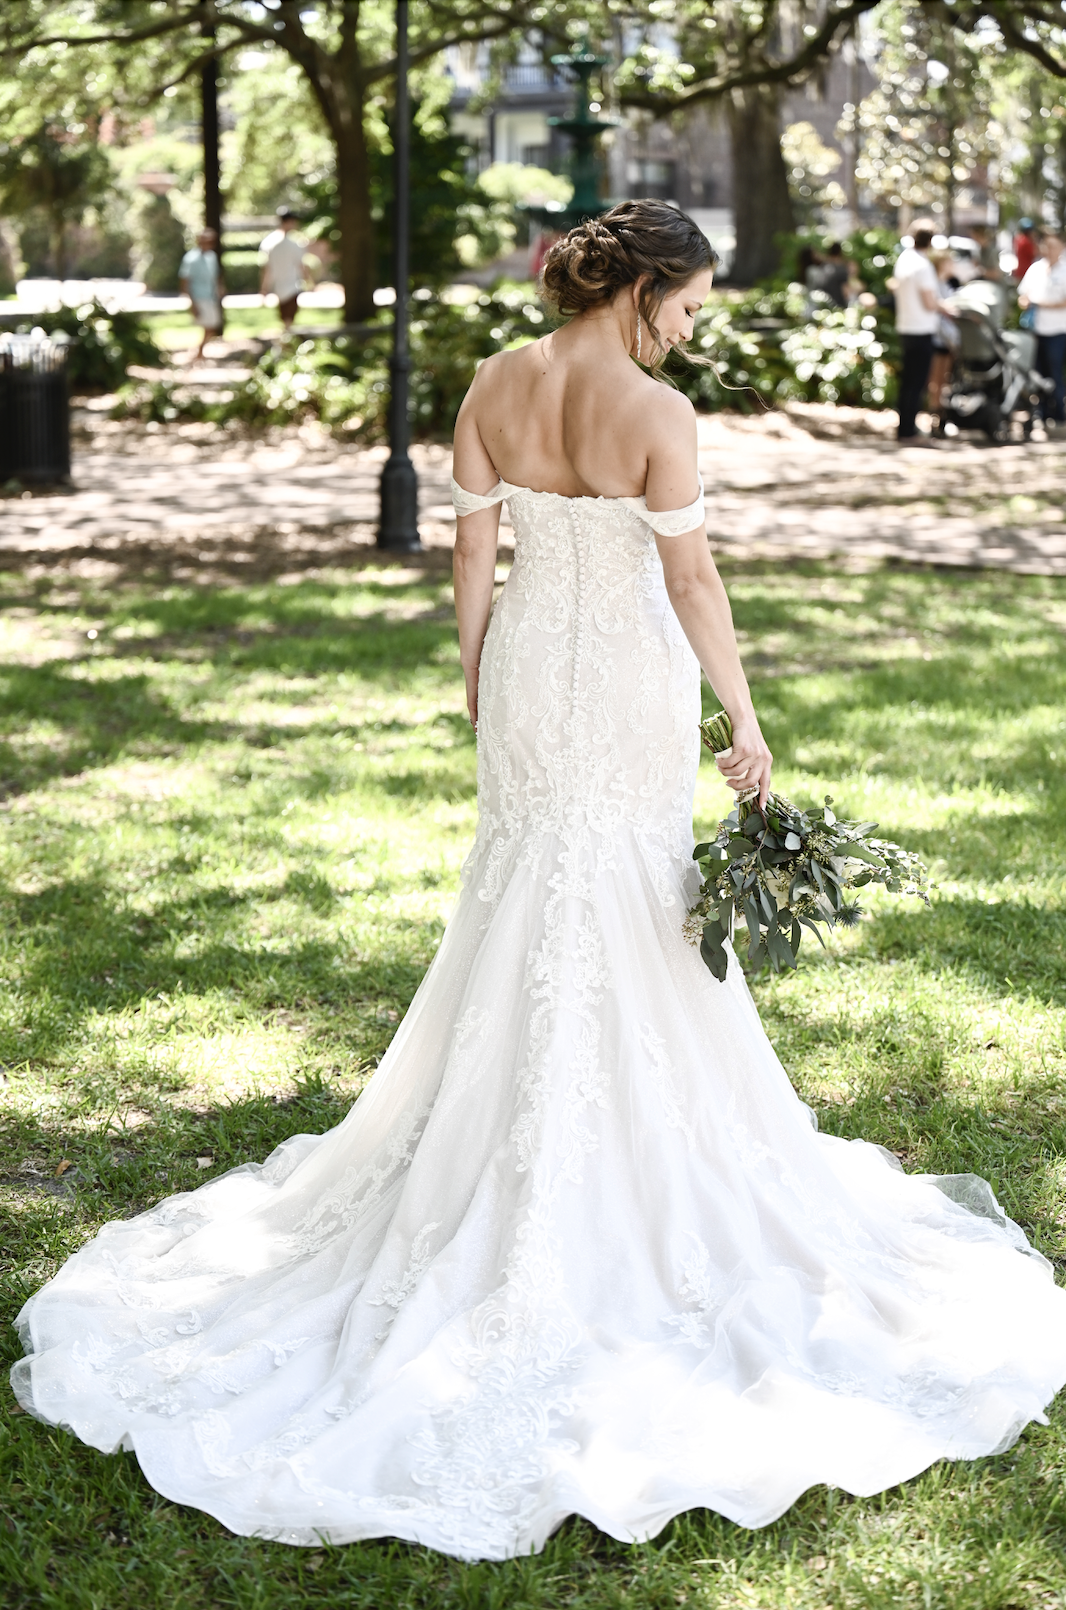 ivory-and-beau-bride-natalie-in-flattering-lace-fitted-mermaid-wedding-dress-named-frederique-by-maggie-sottero-purchased-from-savannah-bridal-shop-ivory-and-beau-2.png